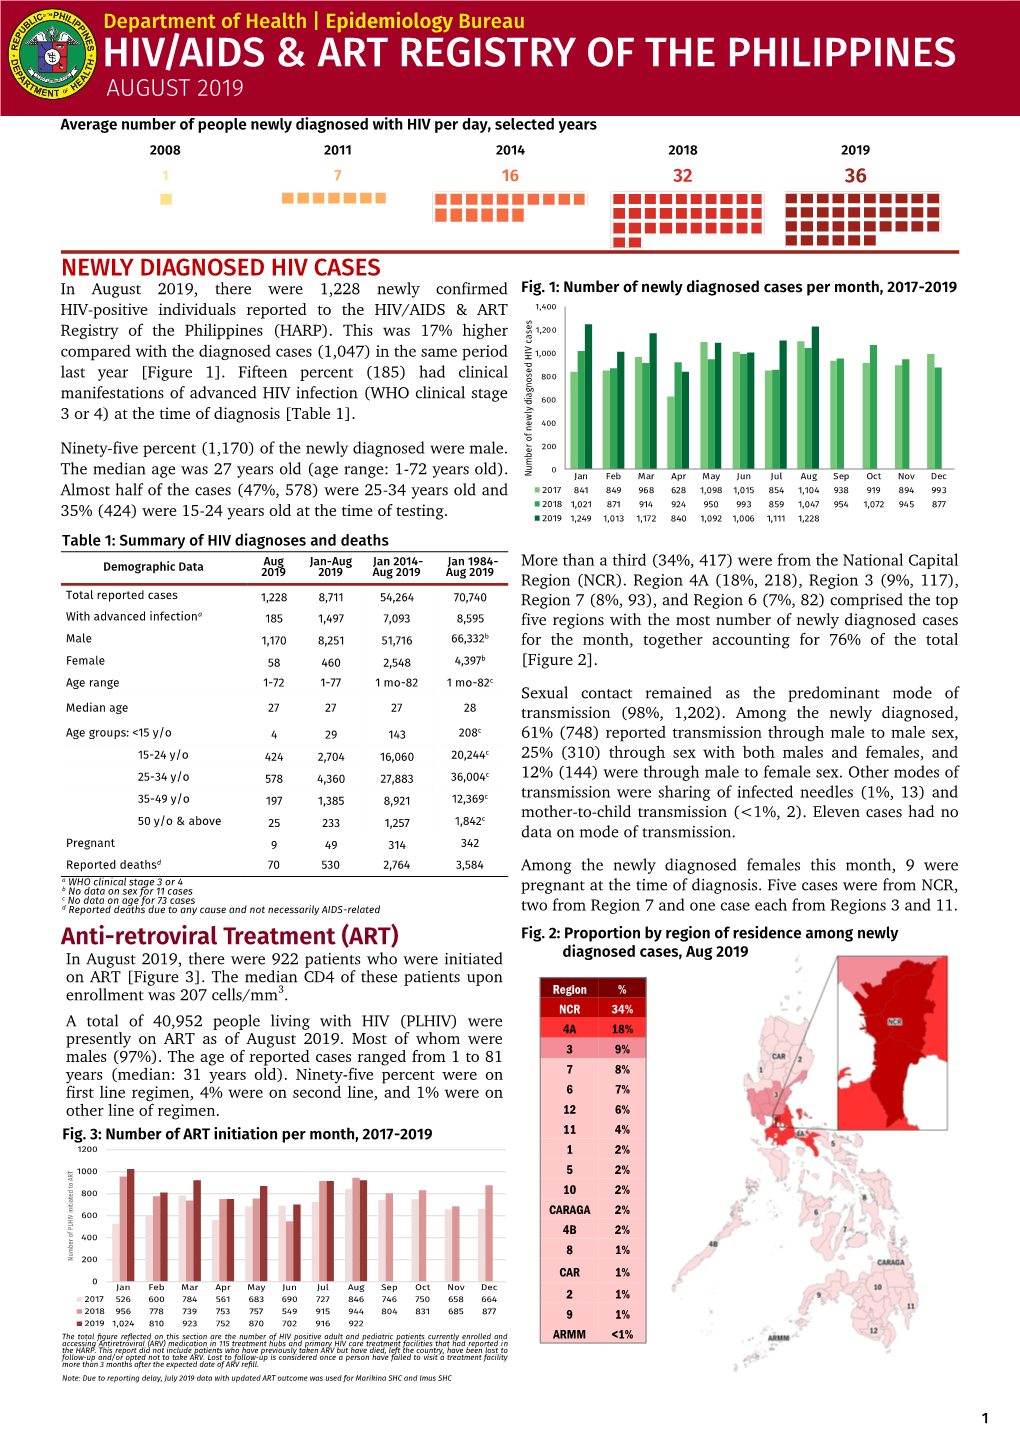 HIV/AIDS and ART Registry of the Philippines: August 2019